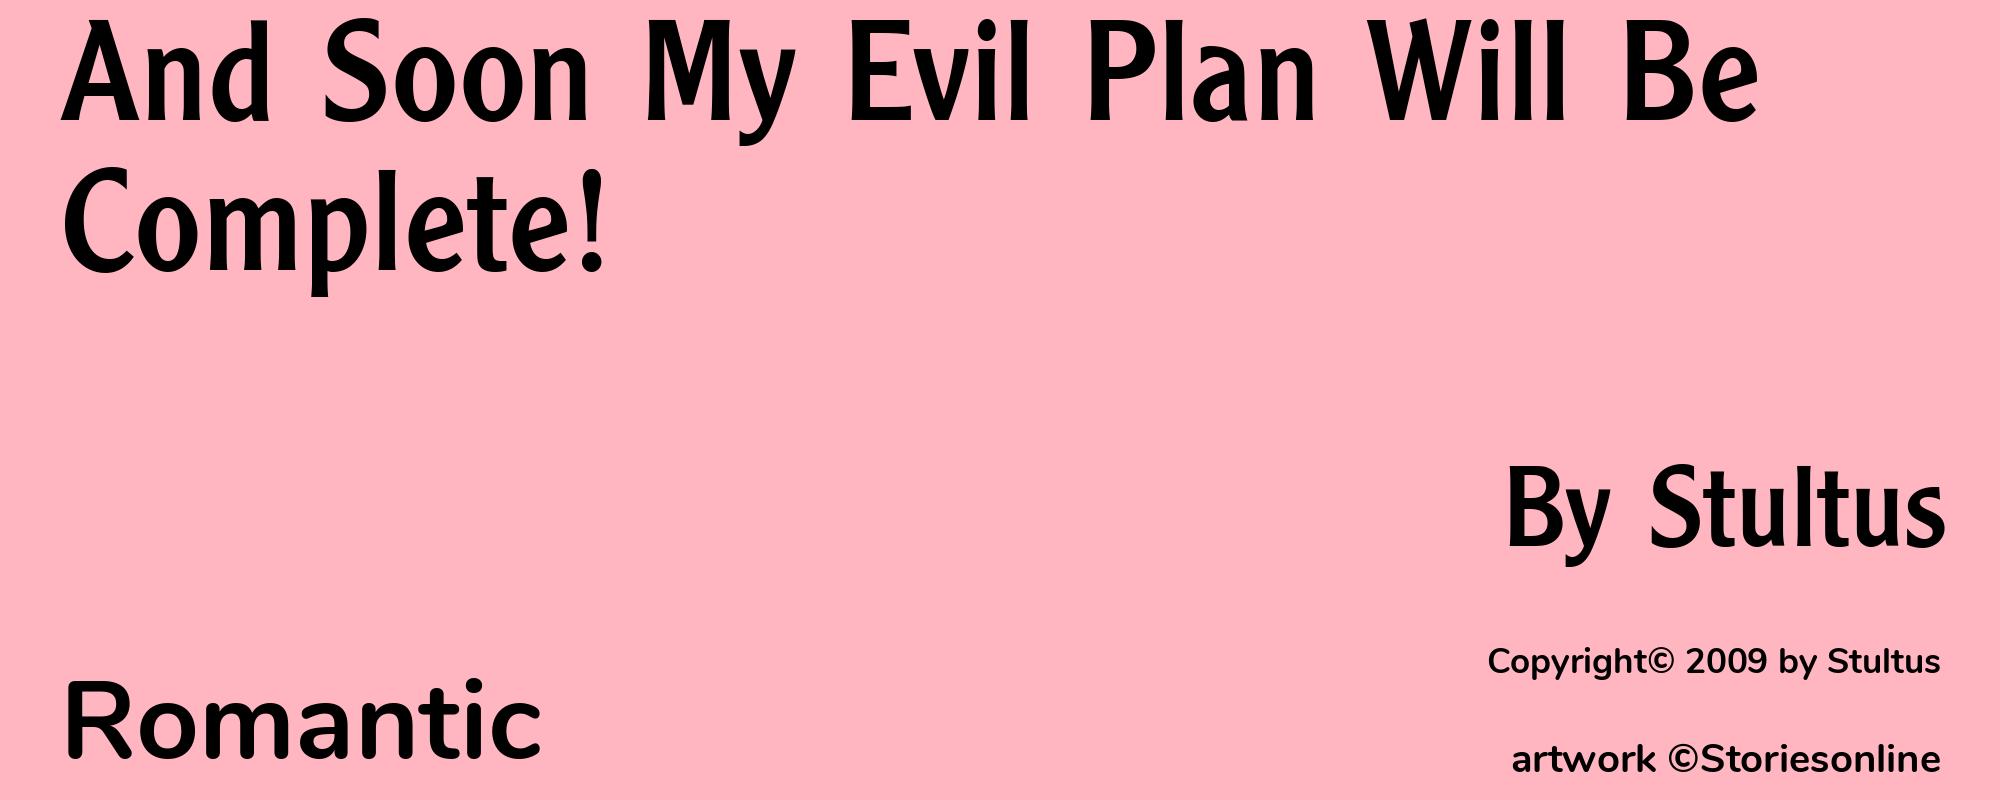 And Soon My Evil Plan Will Be Complete! - Cover